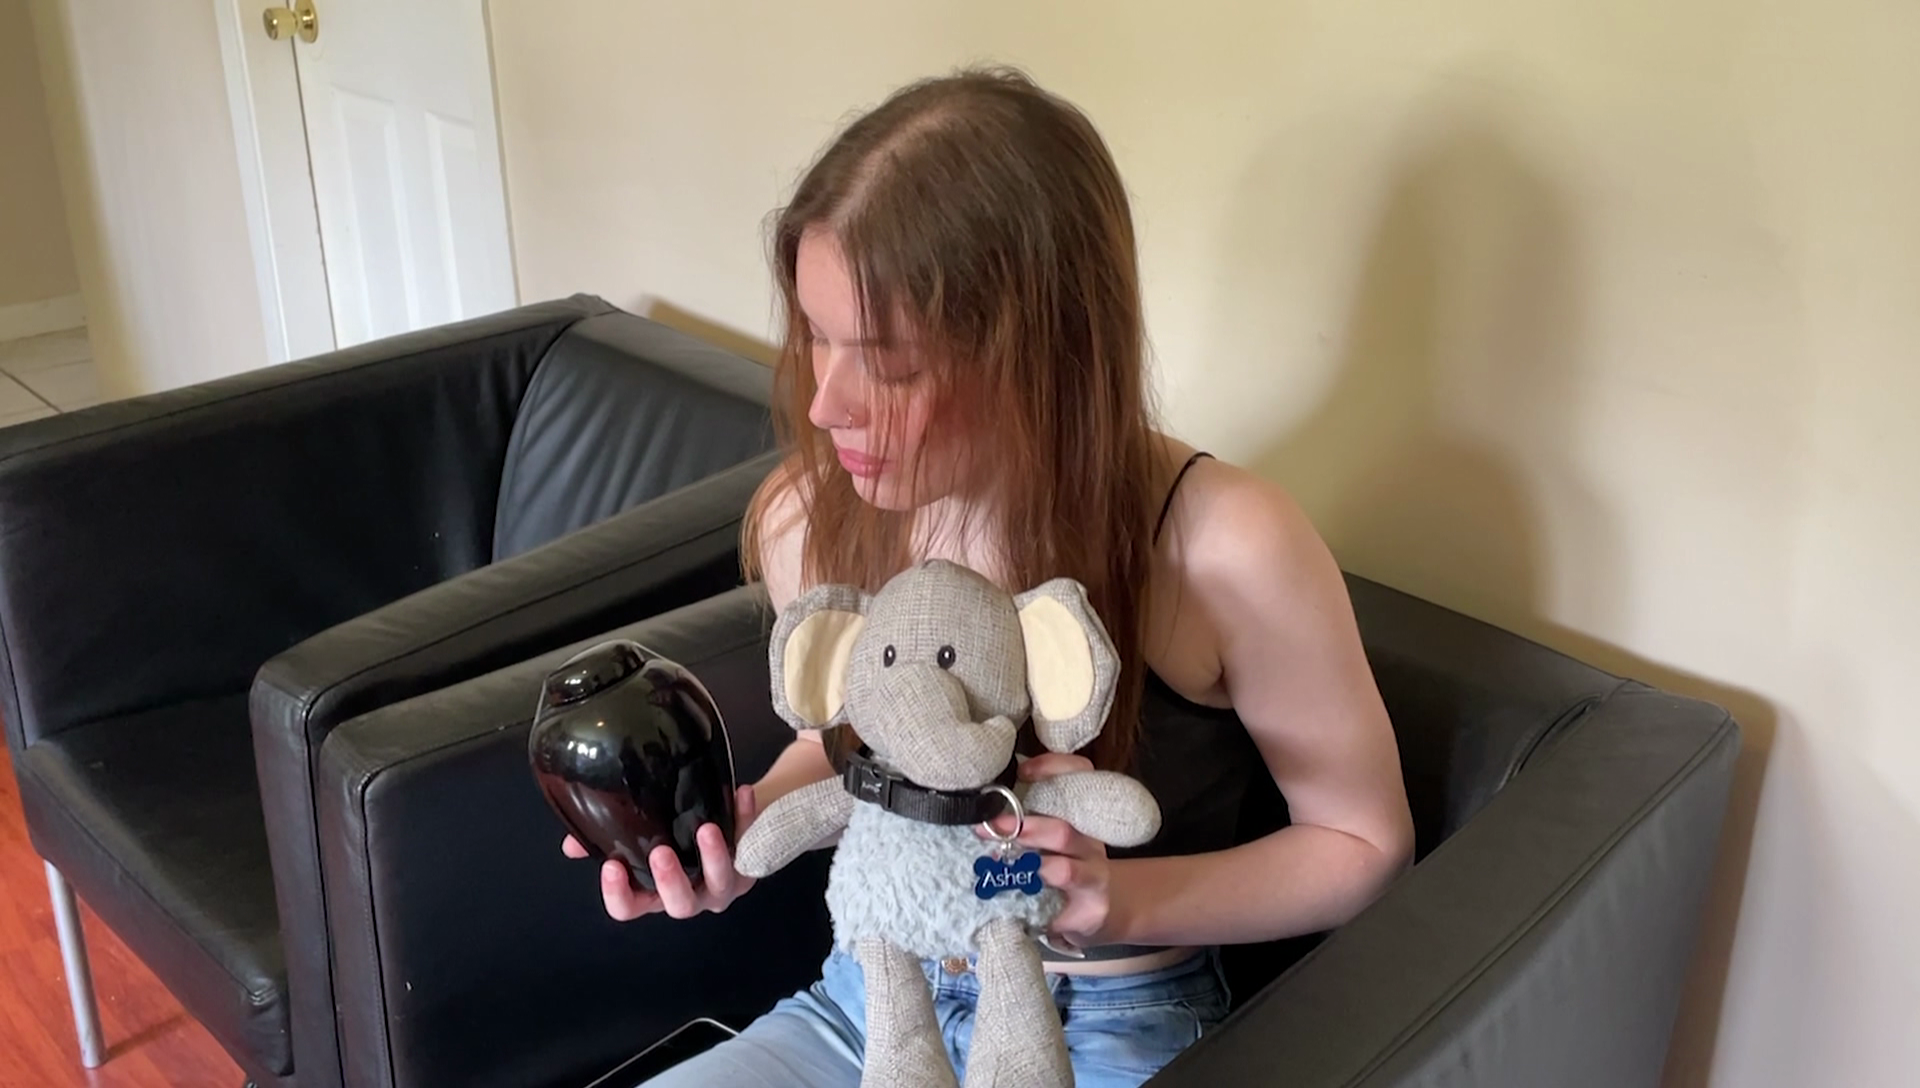 A woman who is sitting in a black armchair holds up a black urn in one hand and an elephant stuffed animal in the left, the elephant with a coller and tag that reads Asher on it